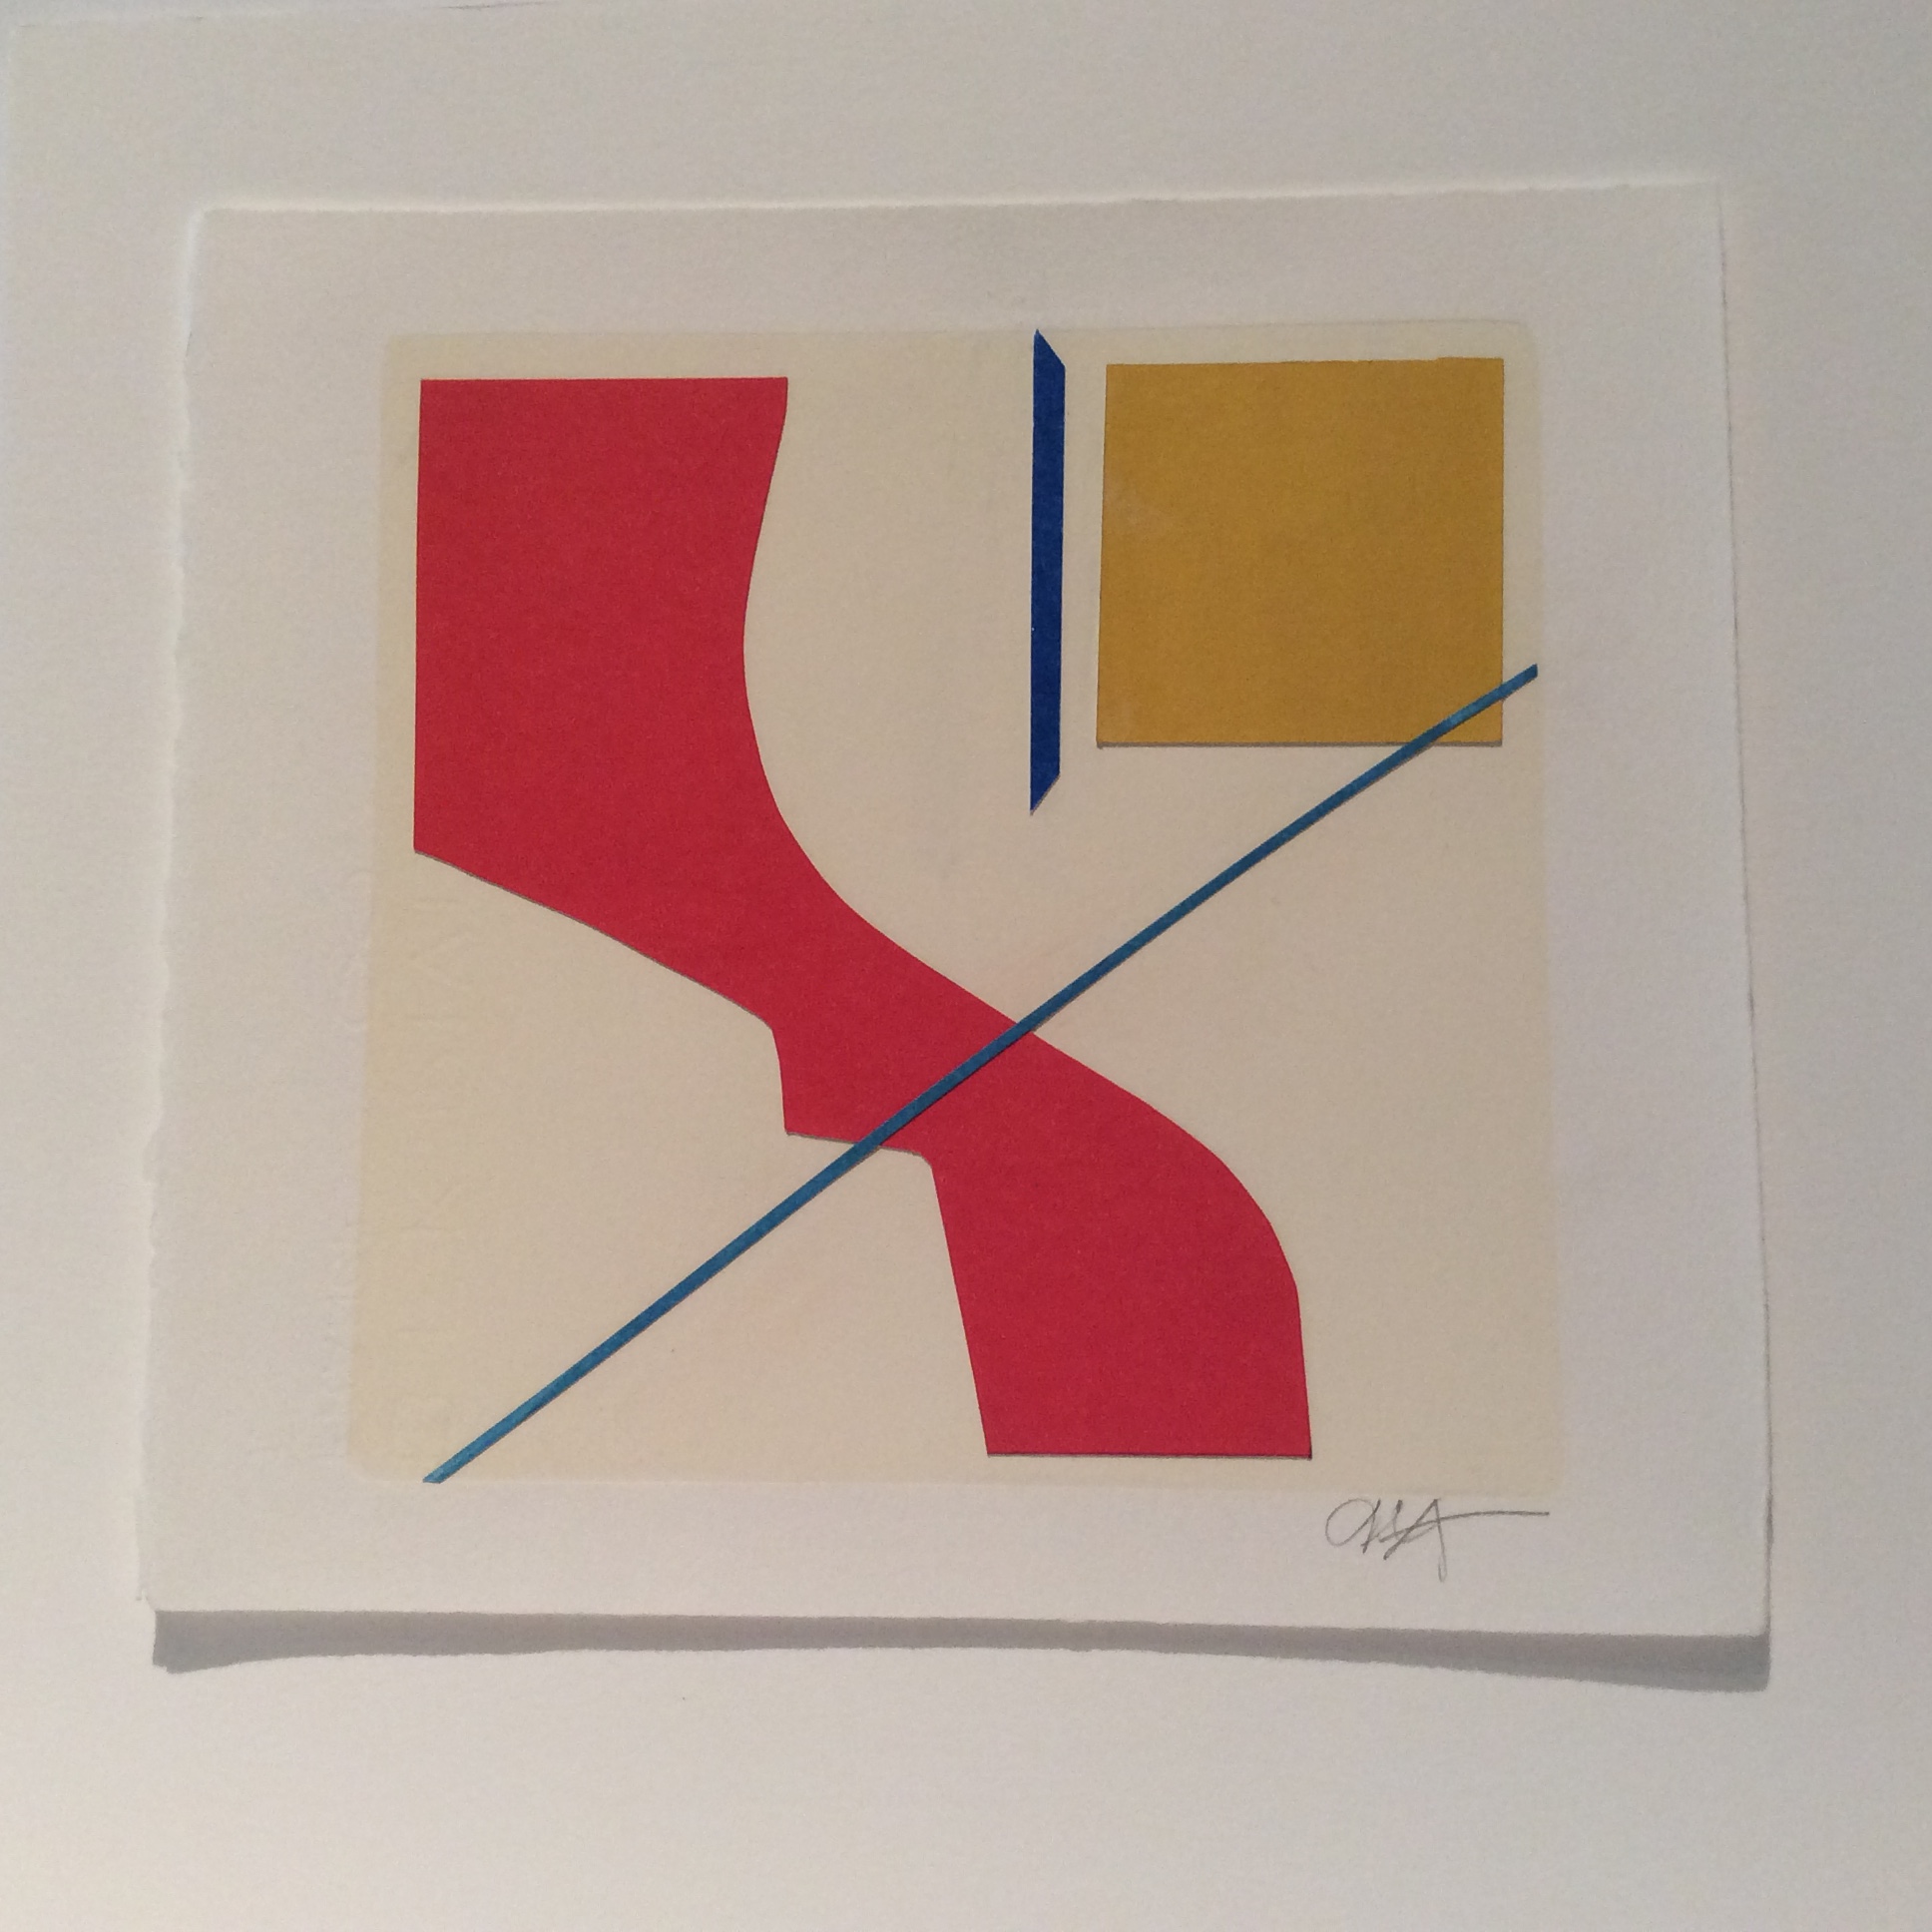 mounted and signed. SALE abstract monoprint piece by Jess Levine